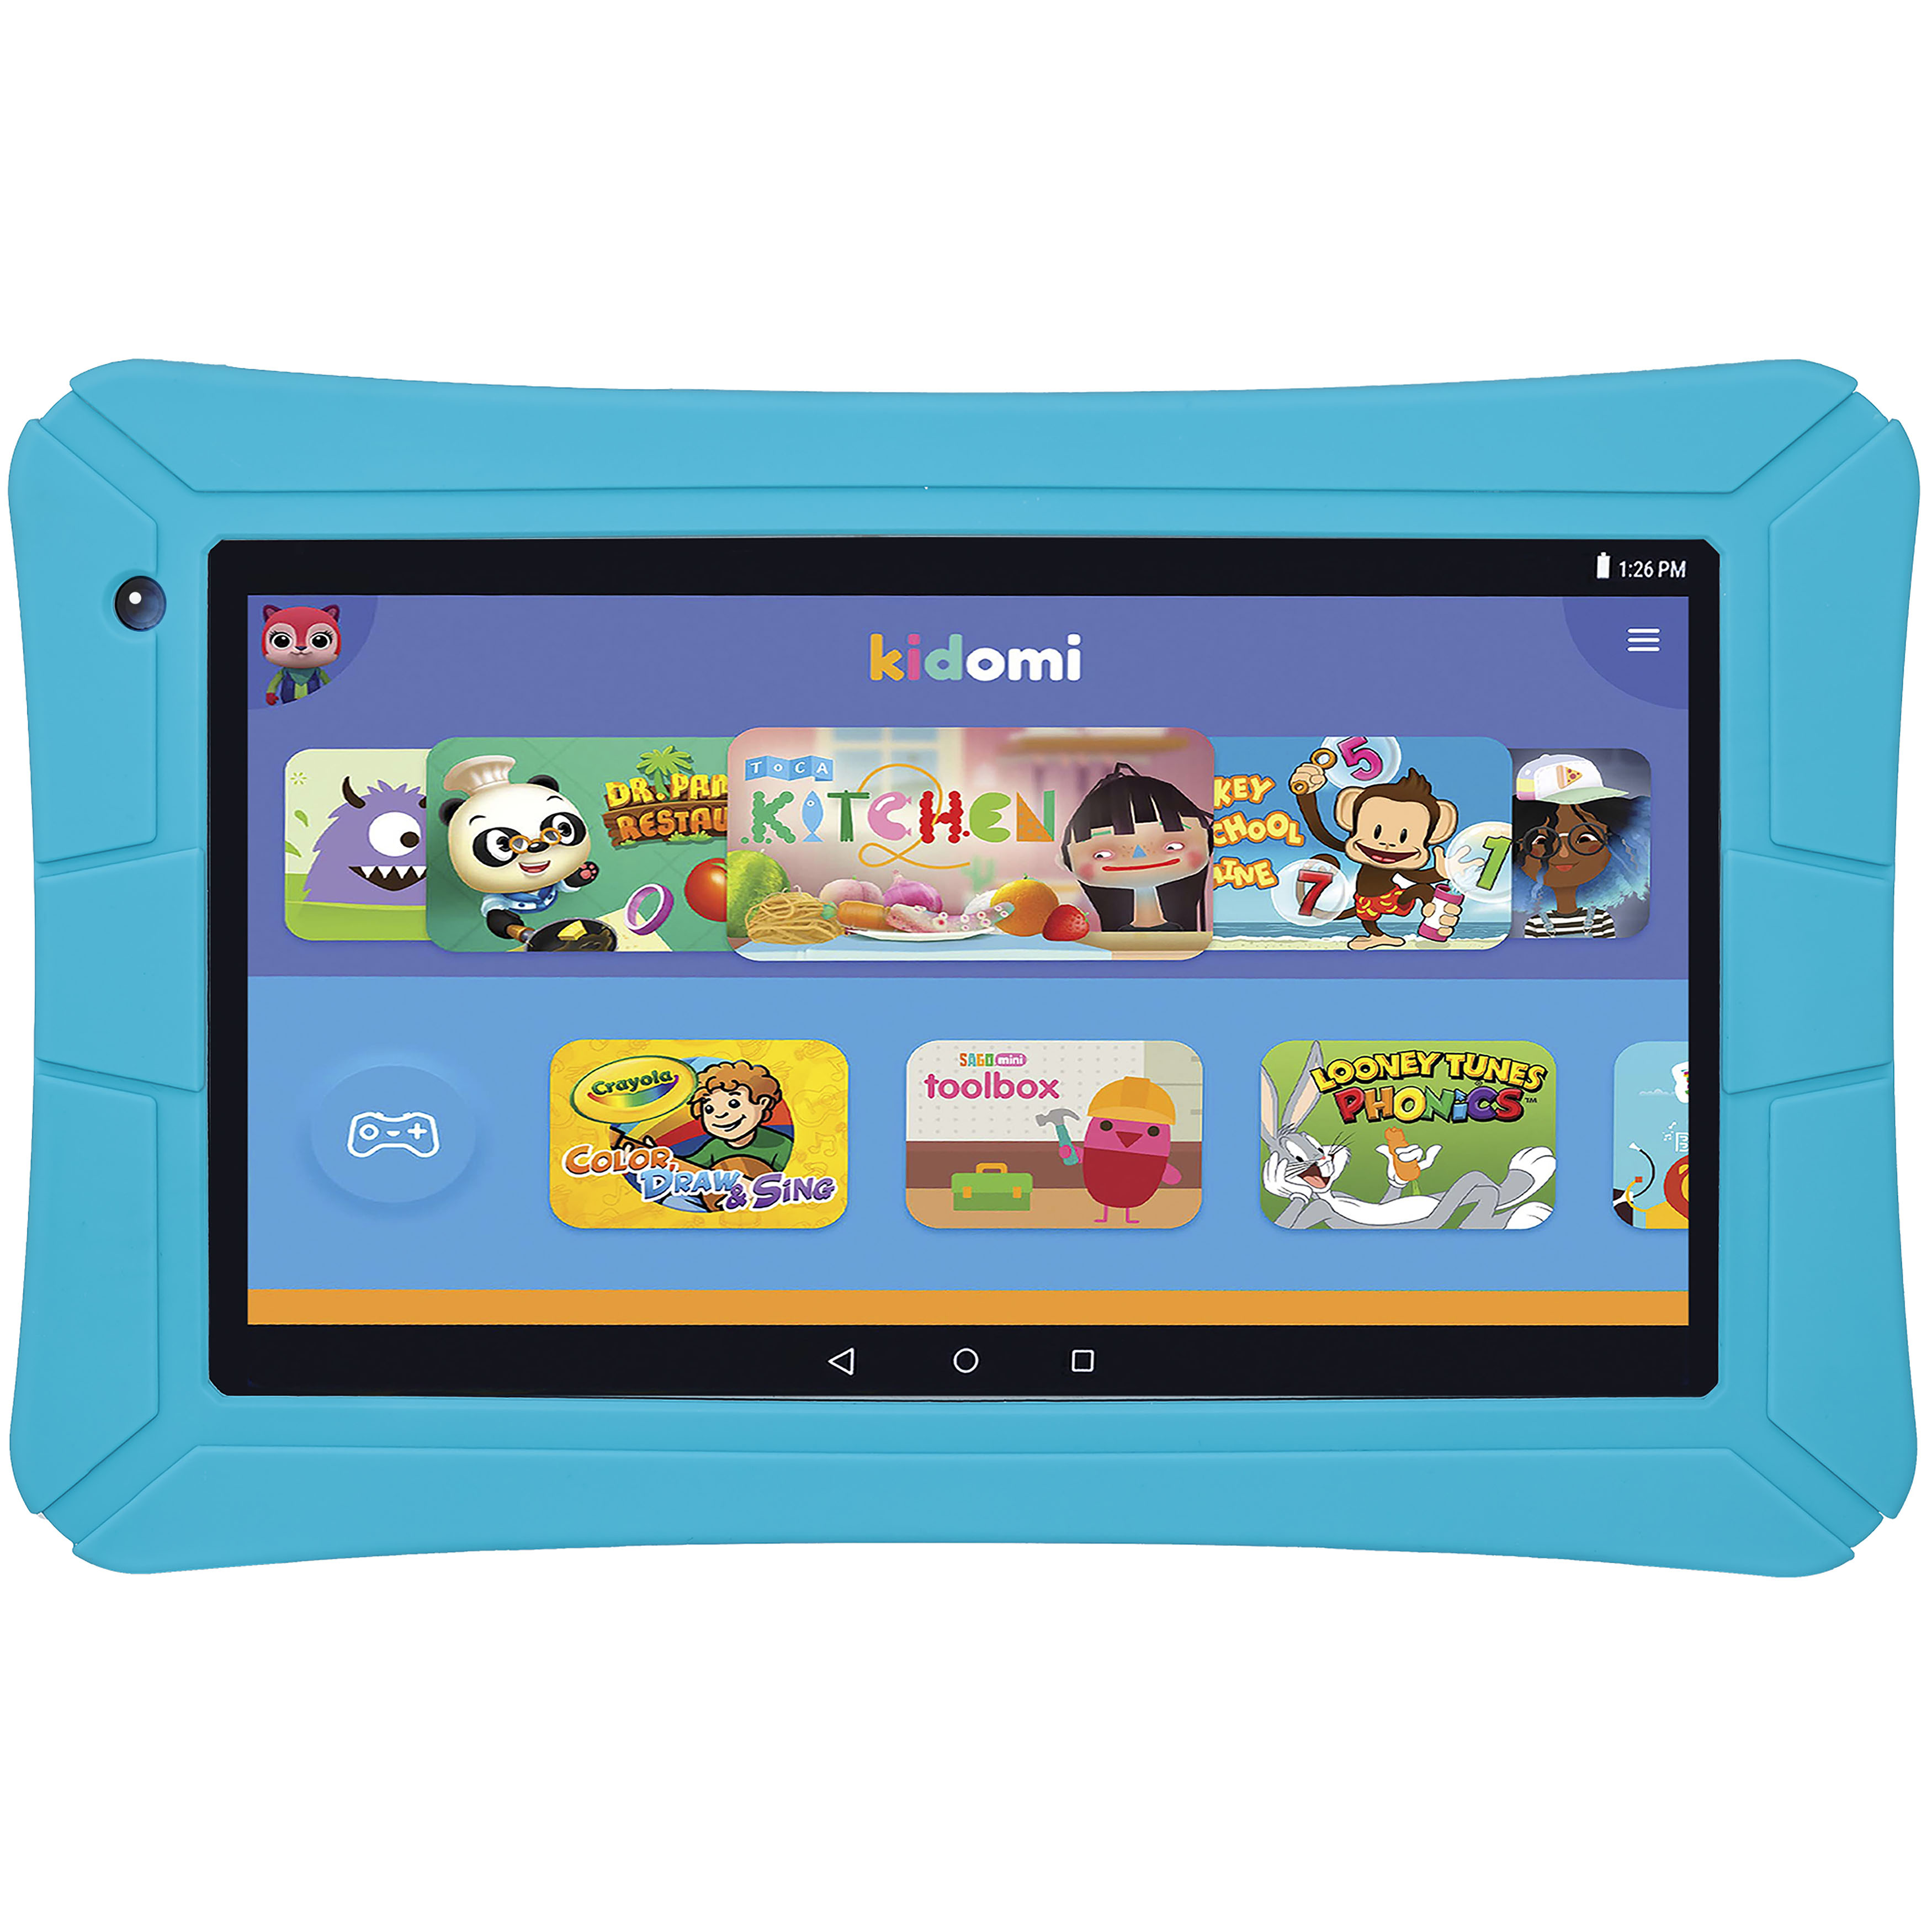 HighQ 7" Learning Tab Jr. featuring Kidomi, Gel Case Included, Quad Core Processor, 8GB Storage, Android 8.1 Go Edition, Dual Cameras, Kidomi Free Trial Included, Blue - image 1 of 8